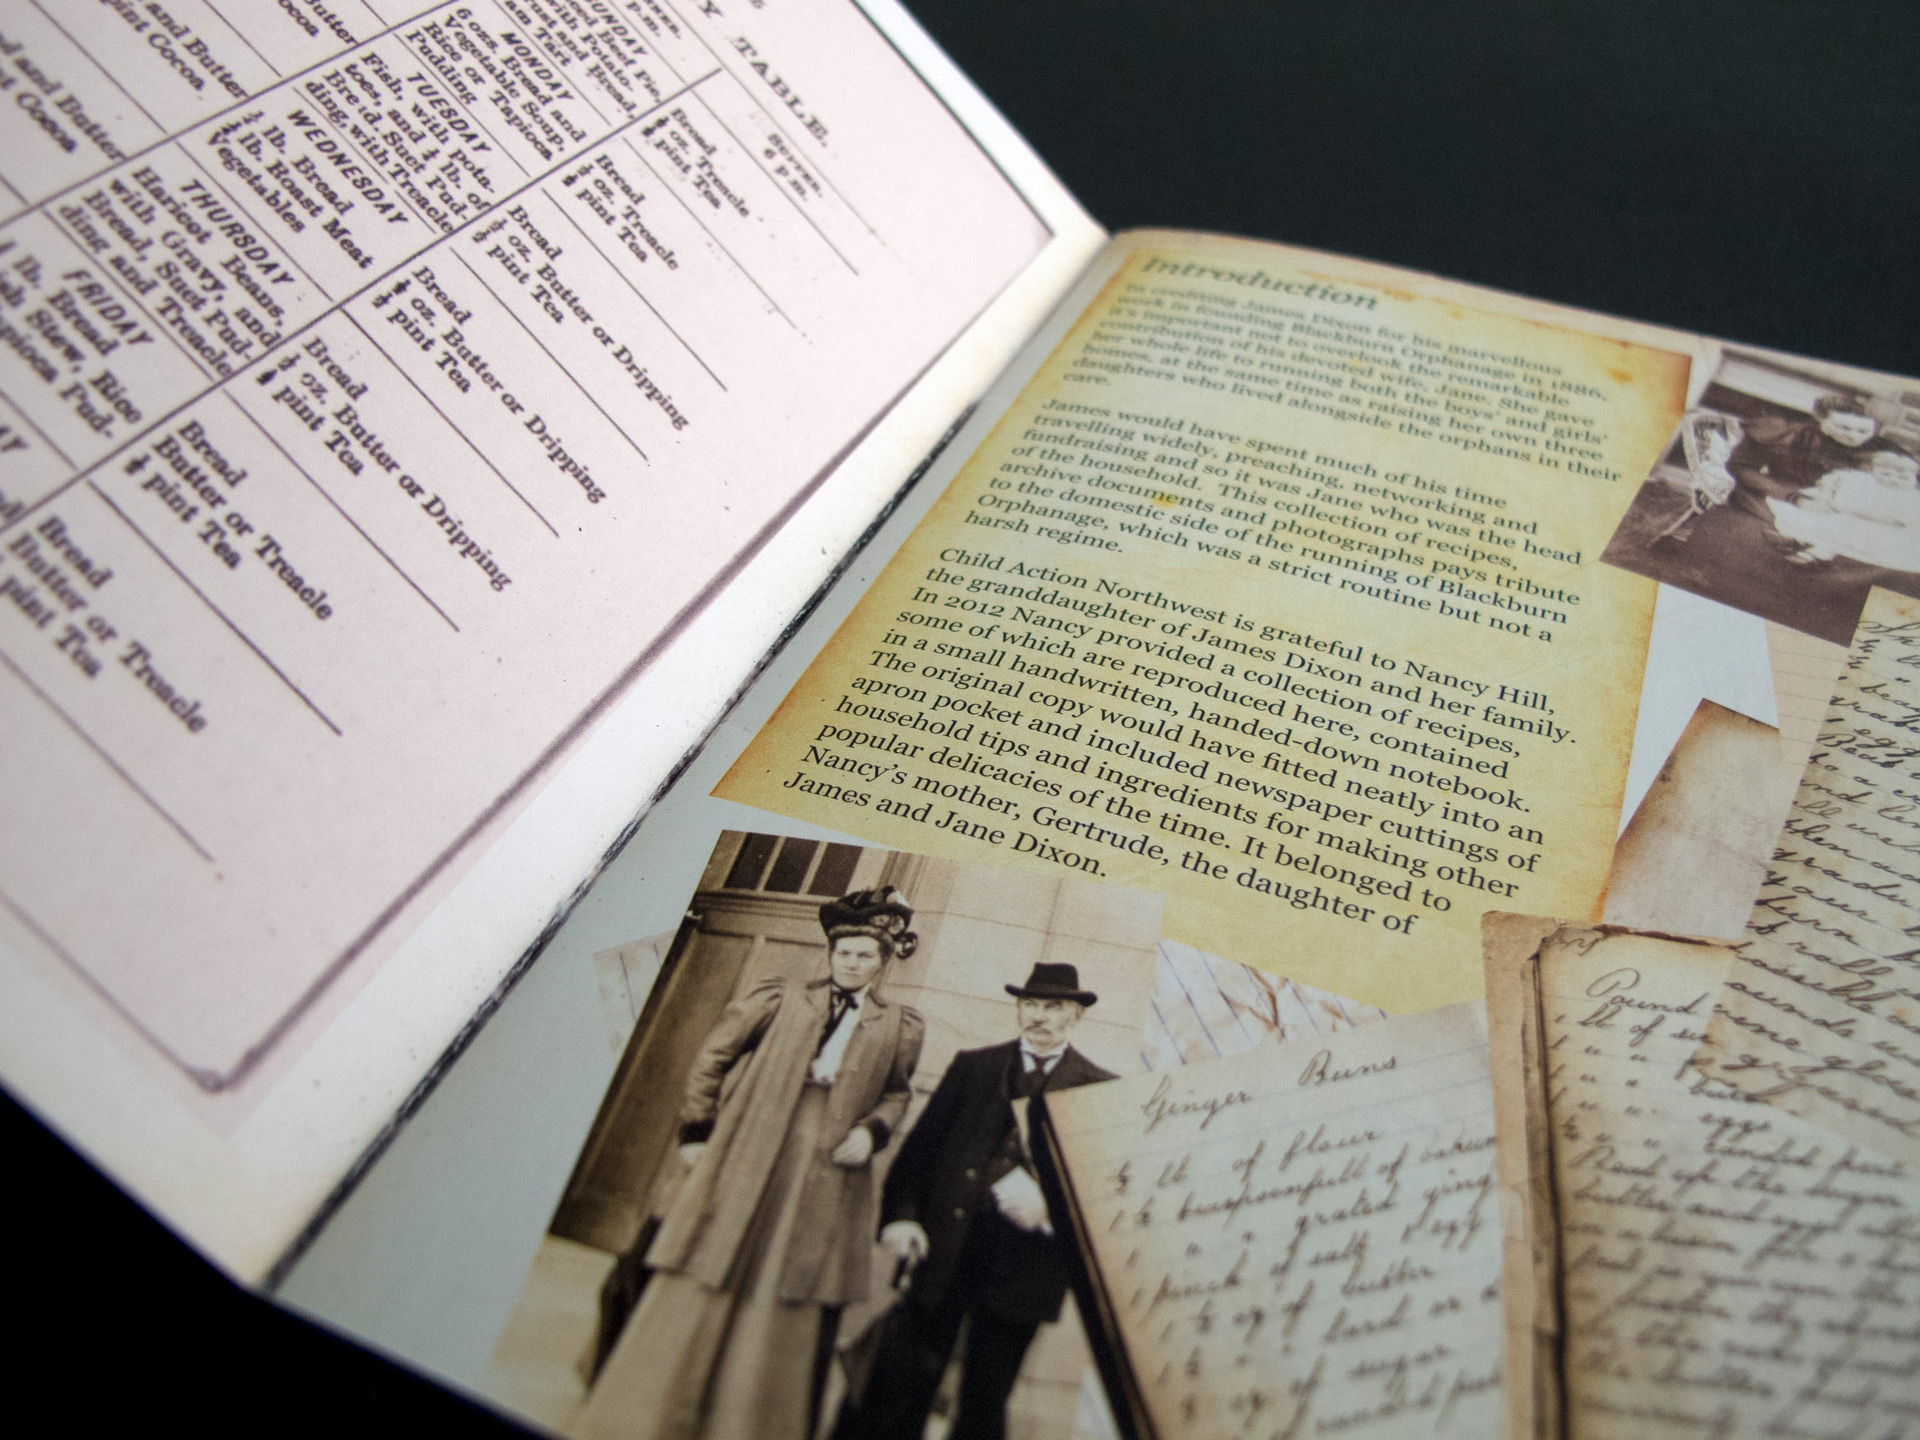 Close-up photo of the brochure welcome pages that are in a collage style. The artwork showcases serif typography, Victorian-era photographs, and handwritten recipes from the past.